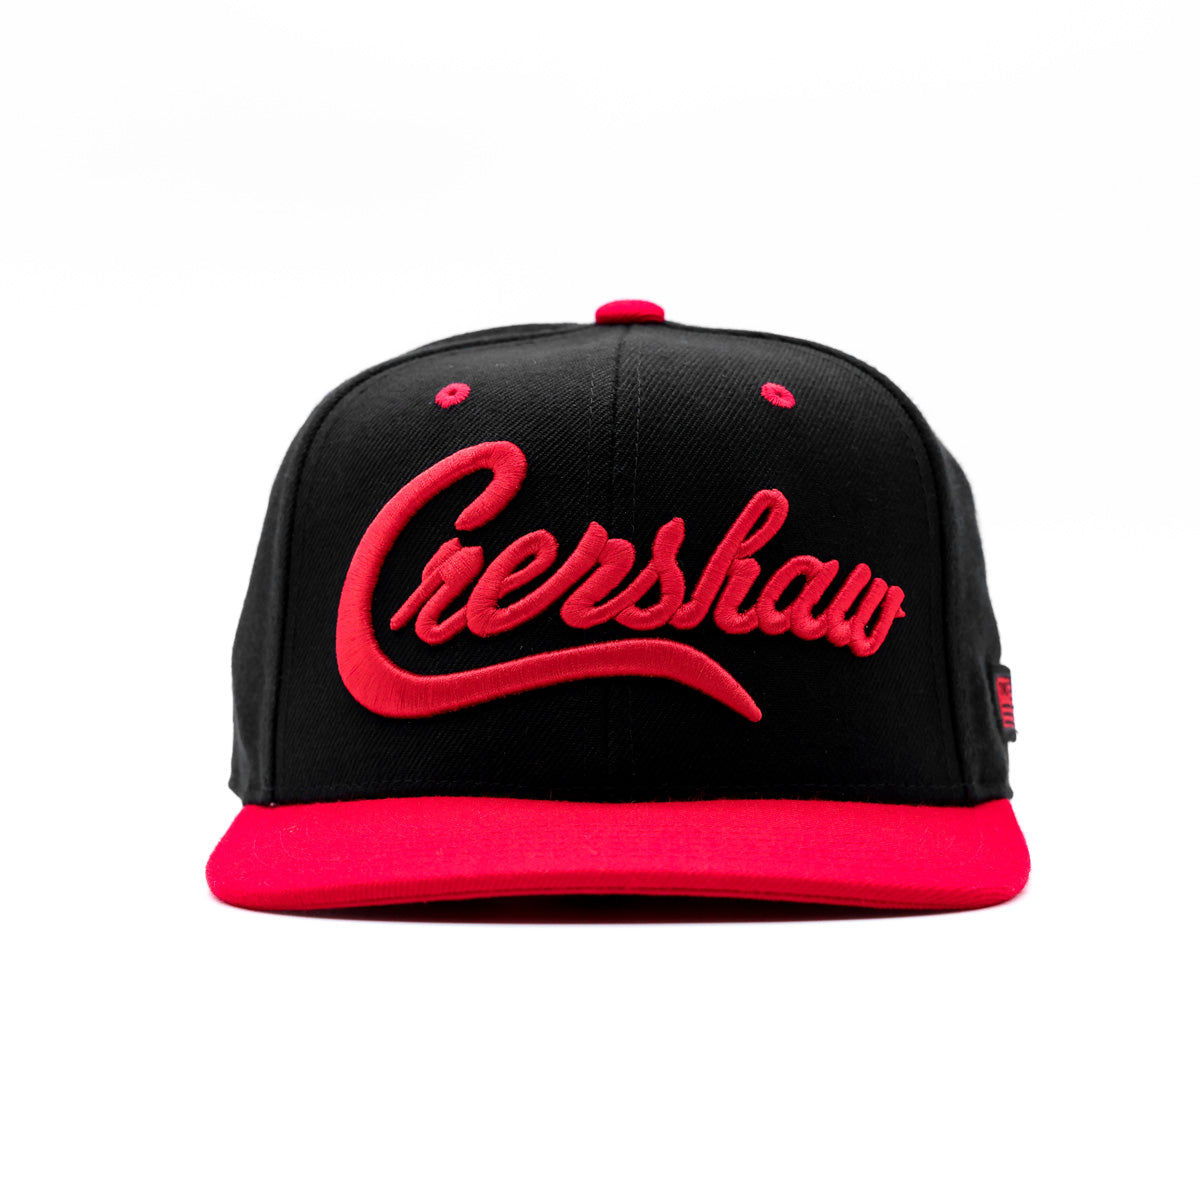 Crenshaw Limited Edition Snapback - Black/Red [Two-Tone] - Front